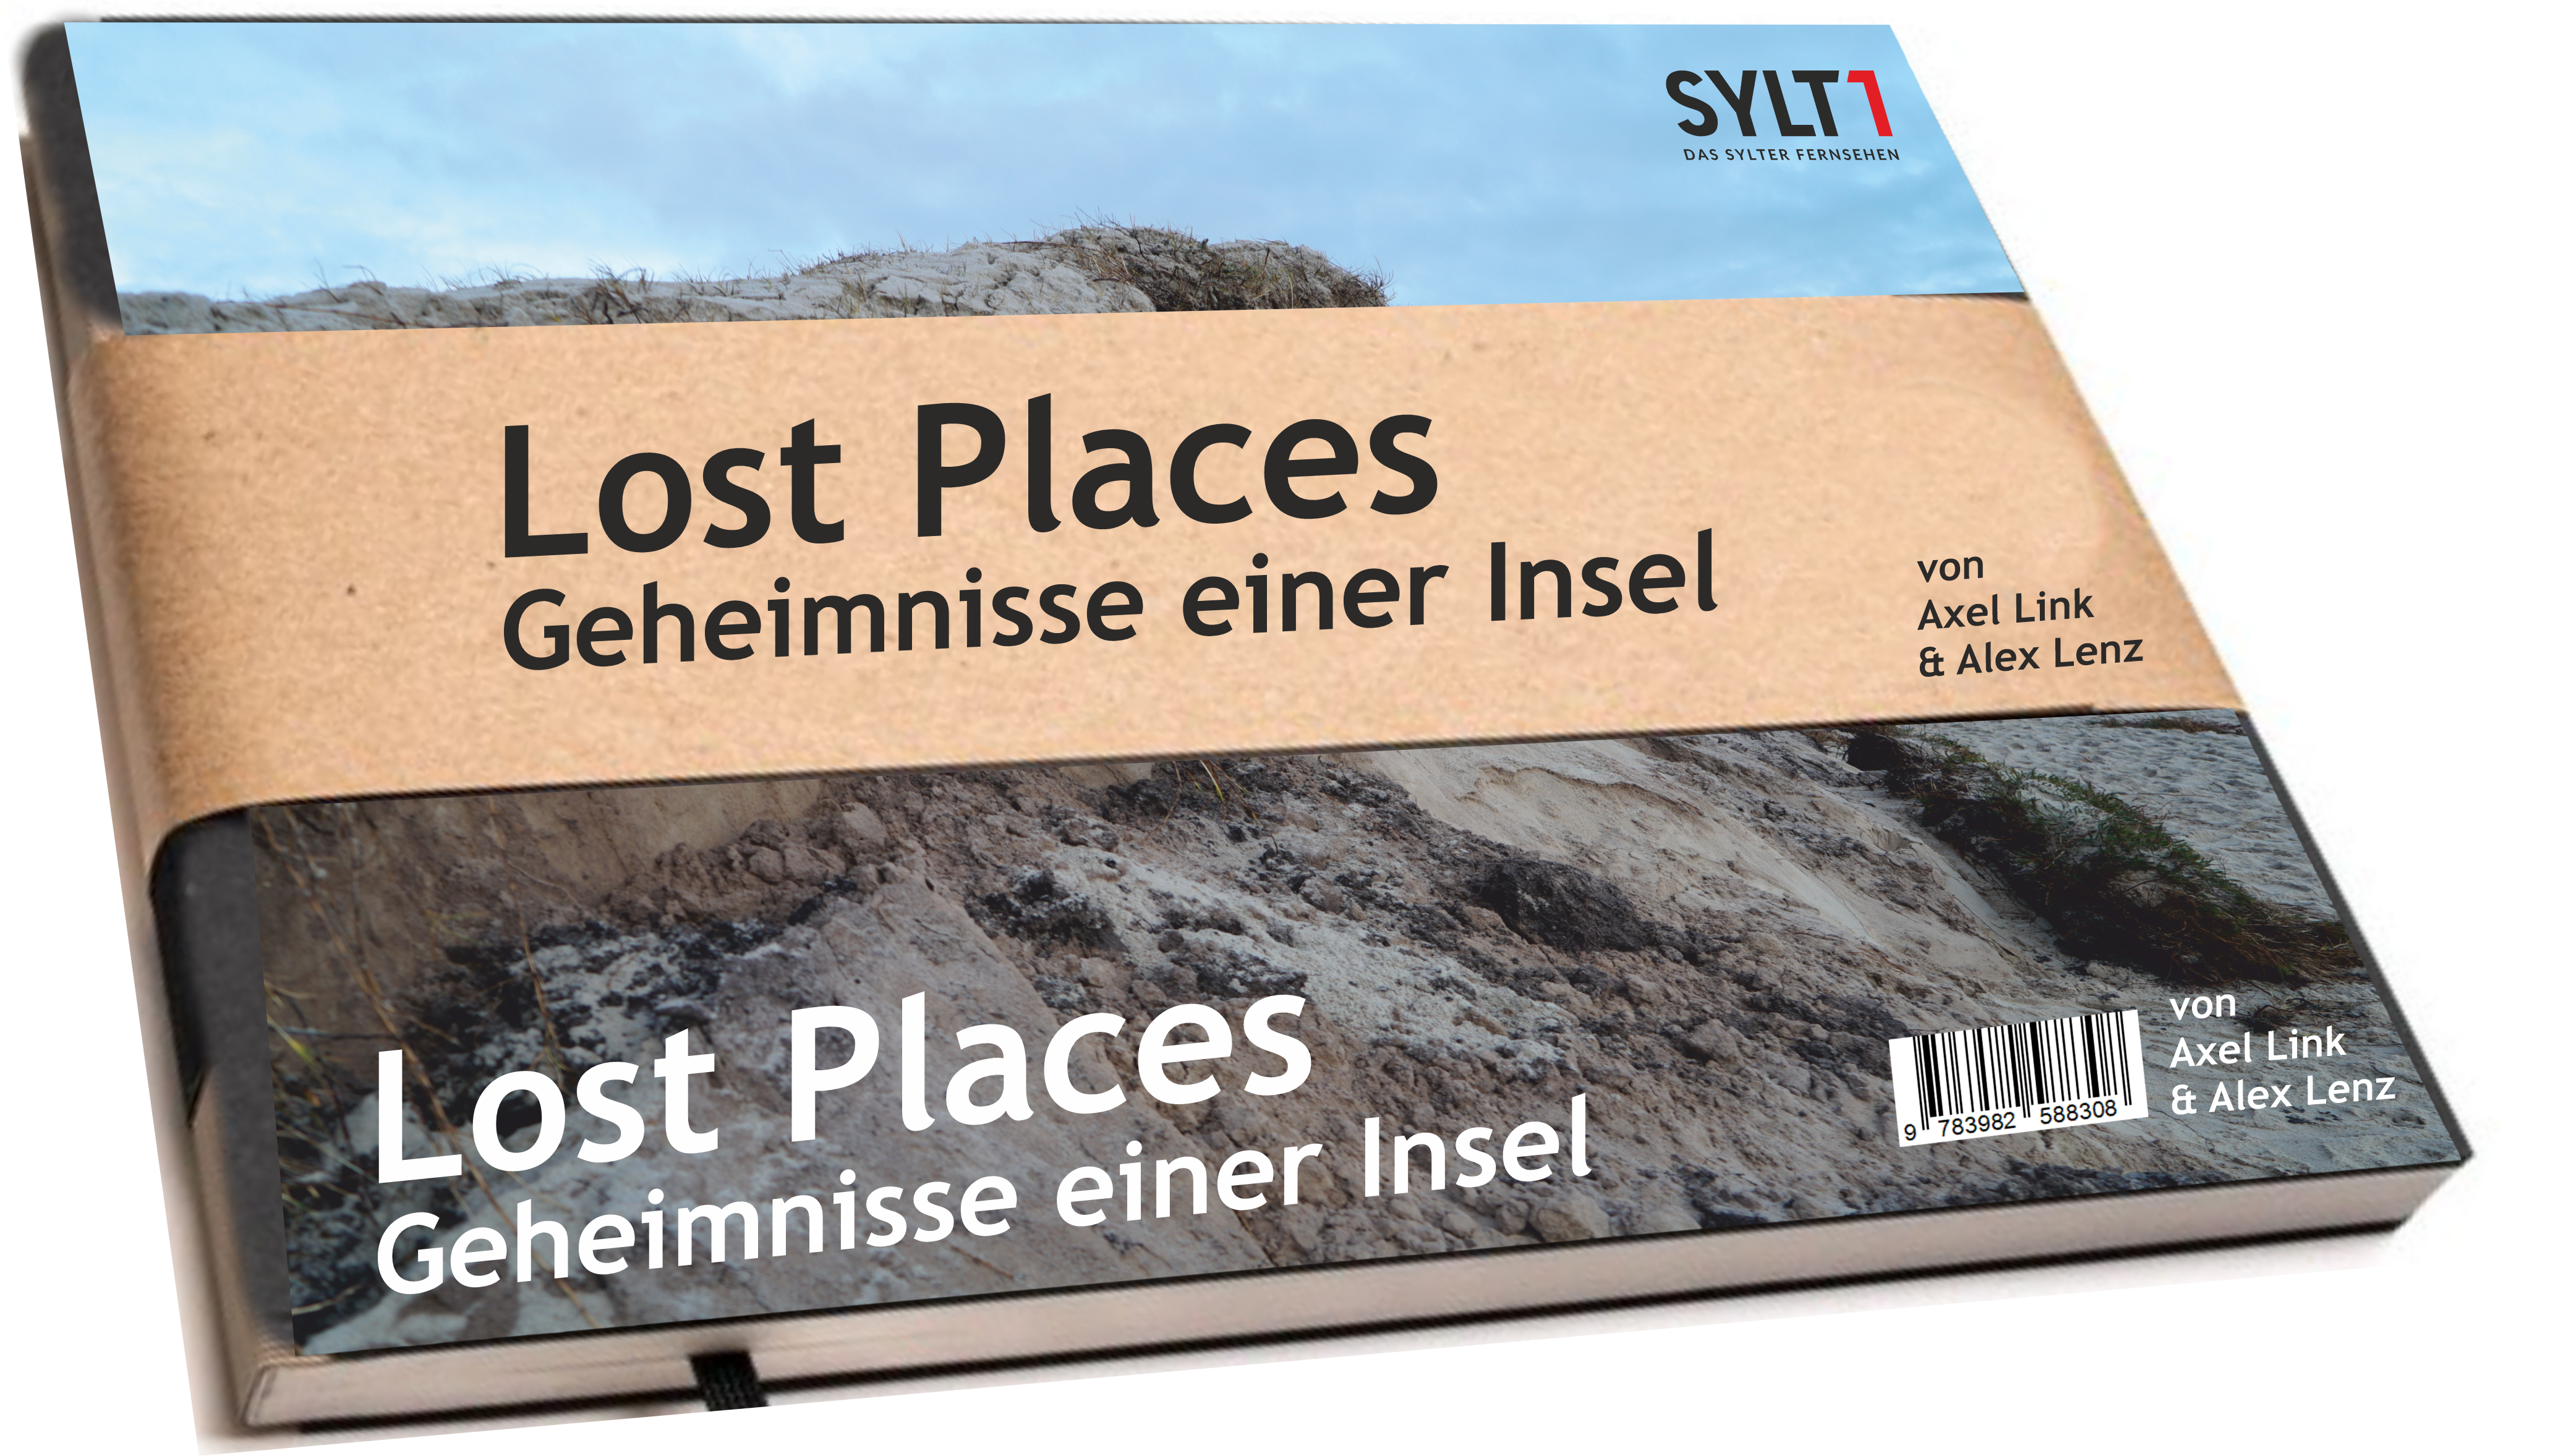 Lost Places Sylt